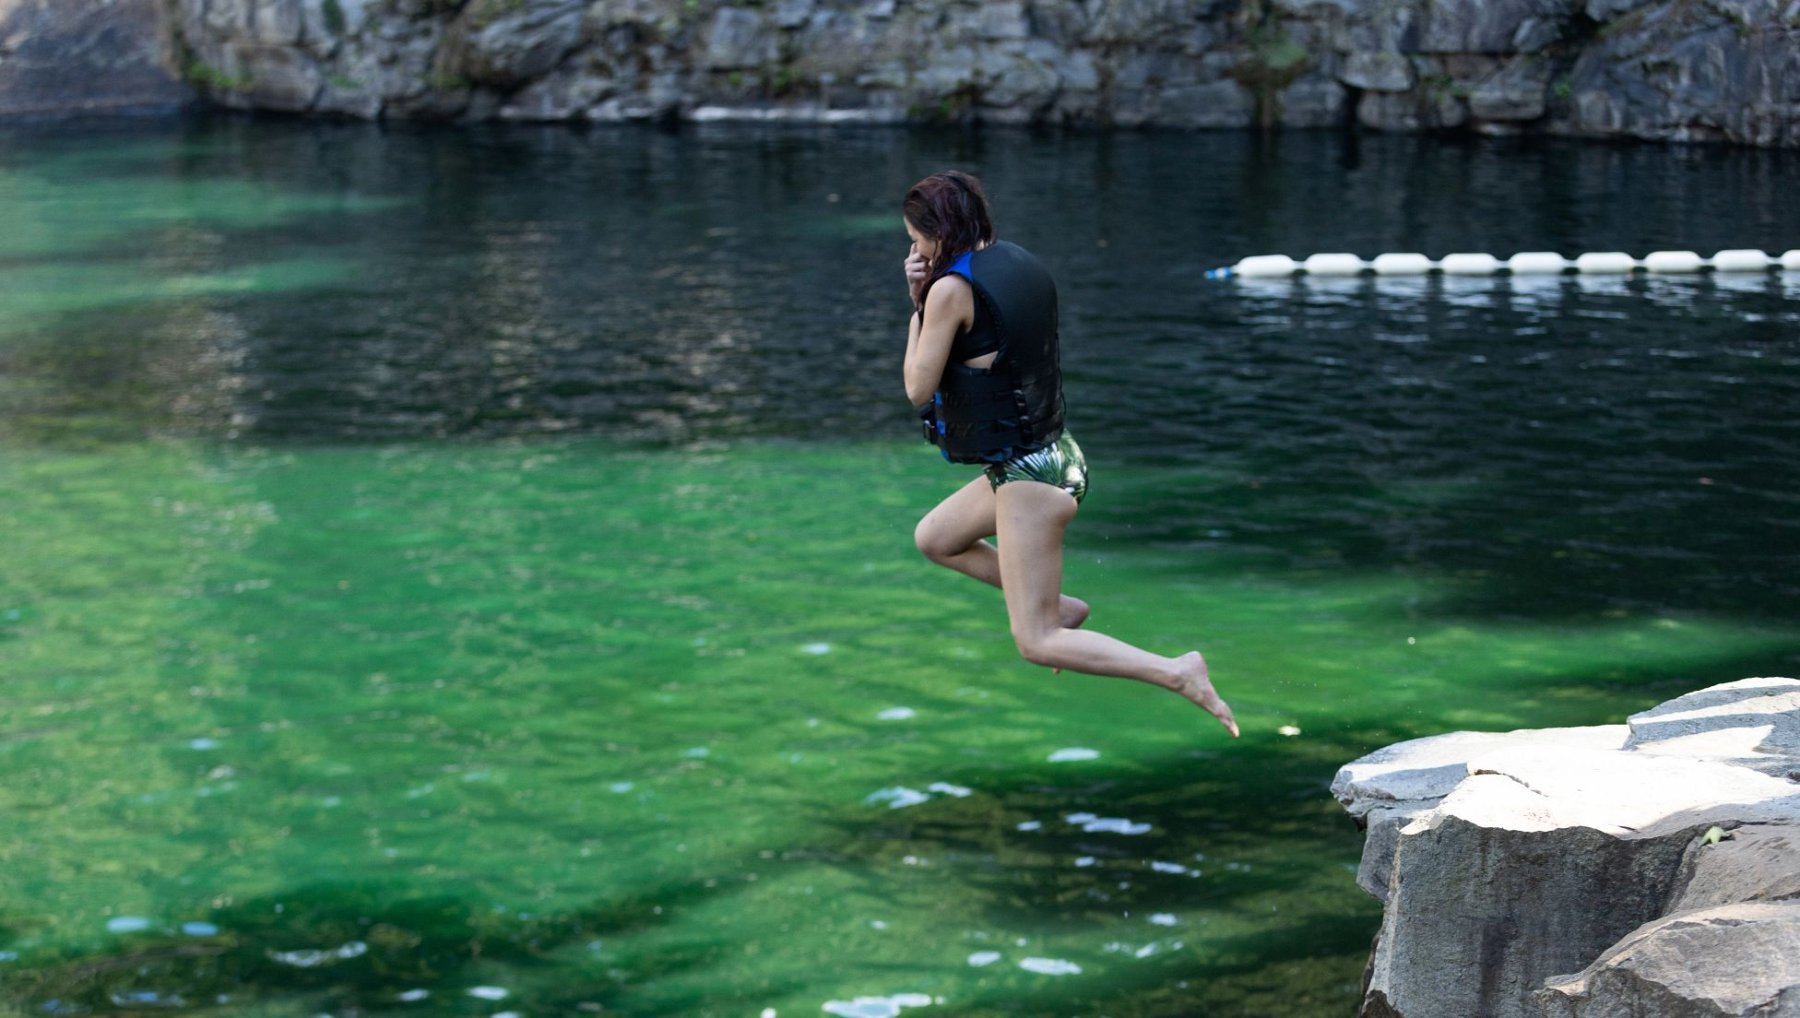 Girl jumping off stone into quarry with stone wall in background.